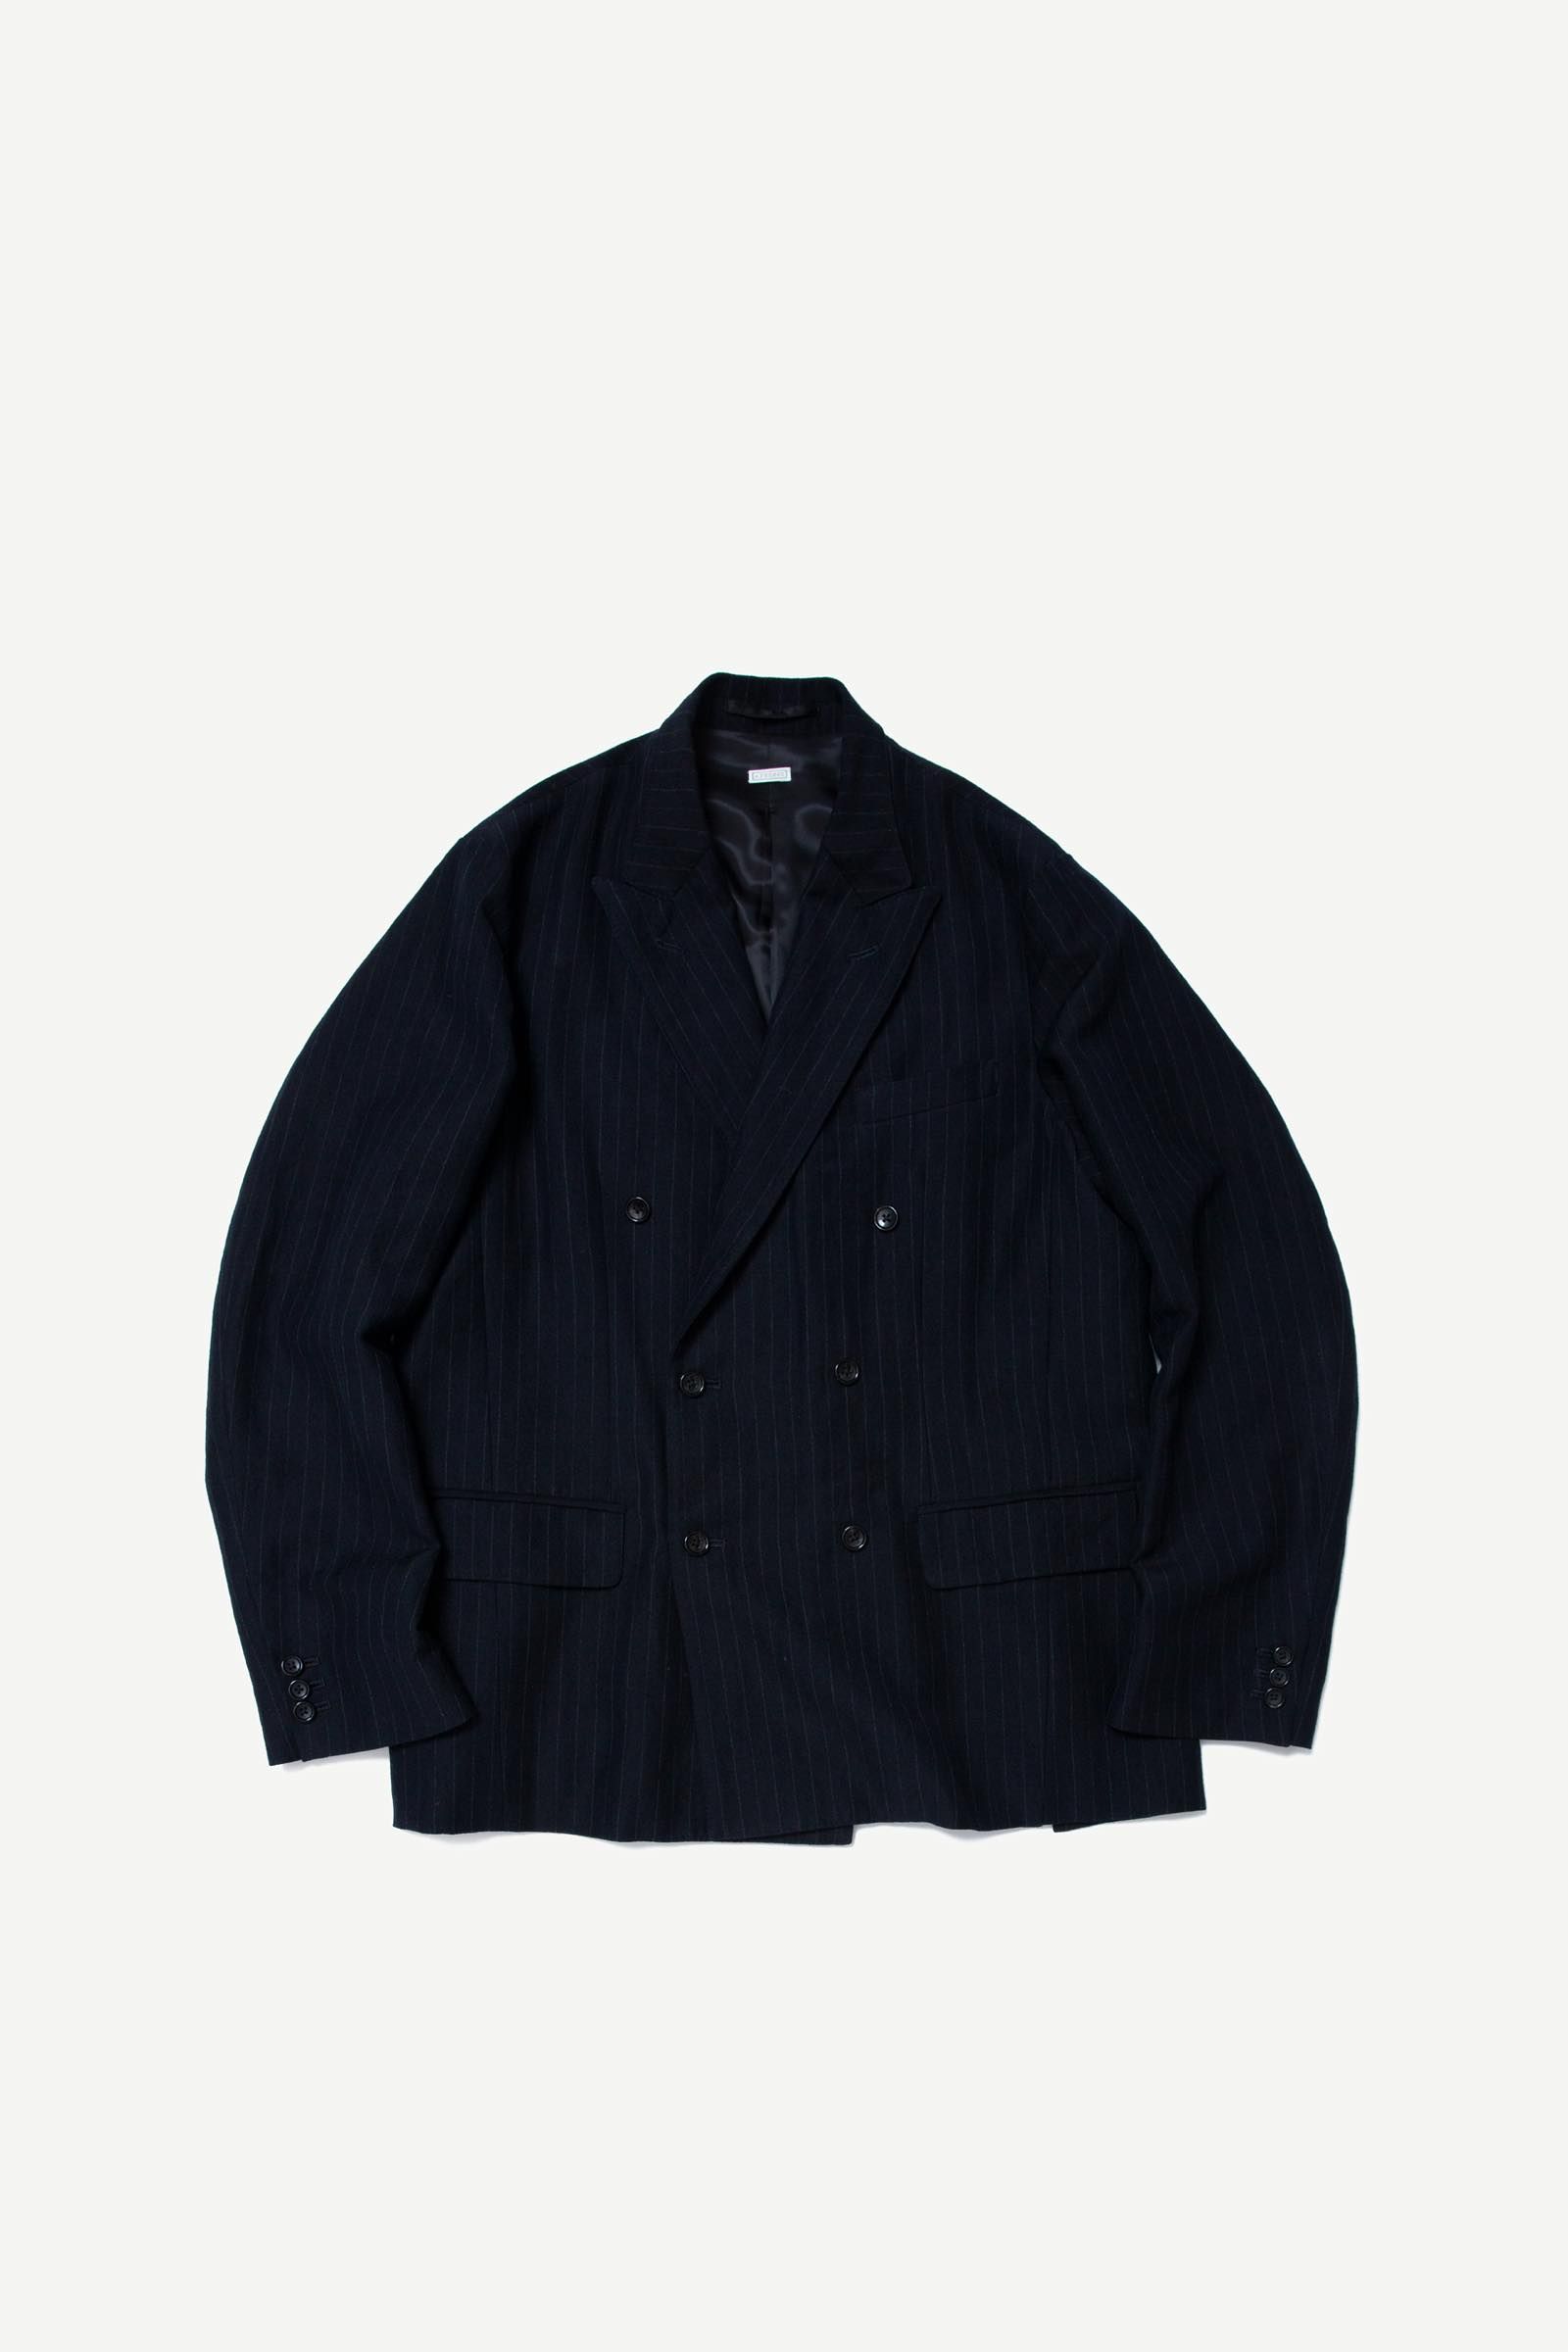 A.PRESSE - double breasted jacket 21aw 8月21日発売! | asterisk